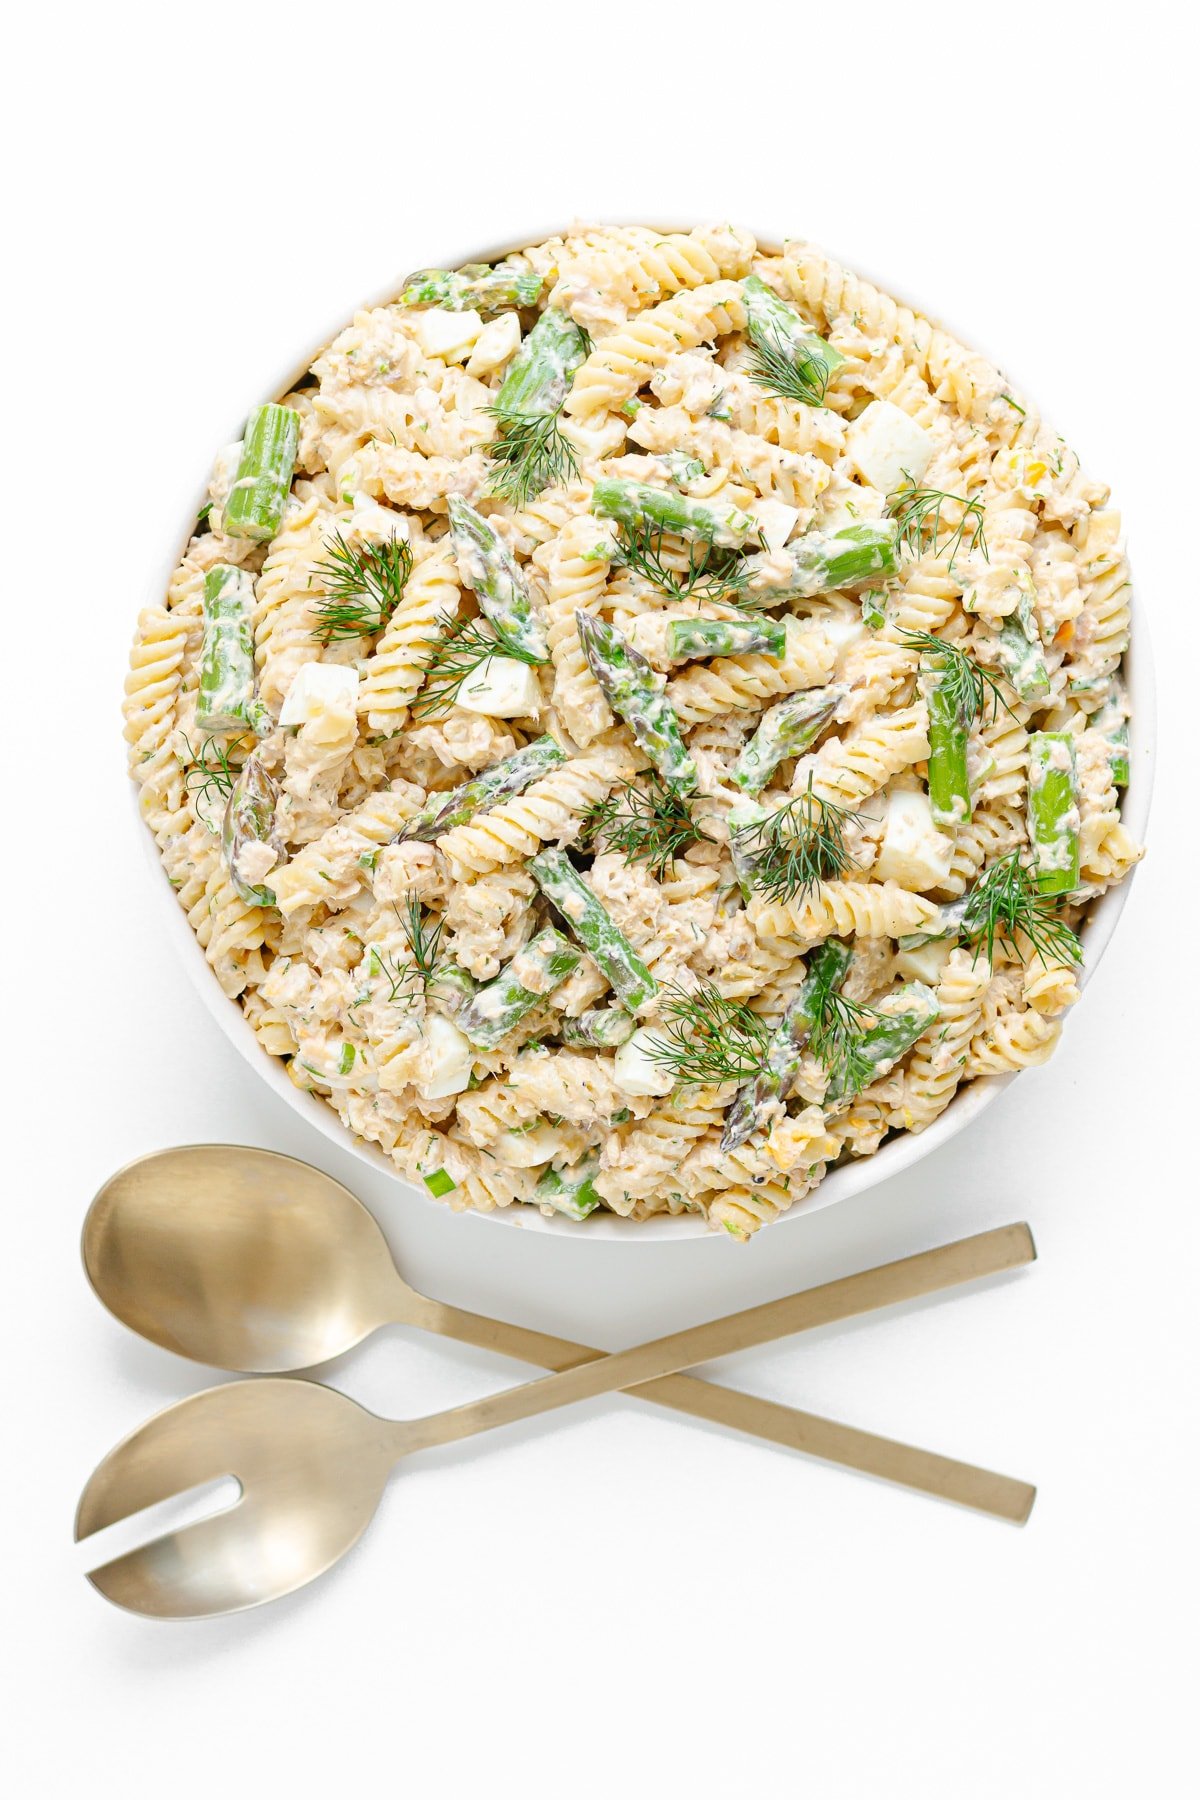 Salmon pasta salad in a white serving bowl with gold salad servers sitting below the bowl.